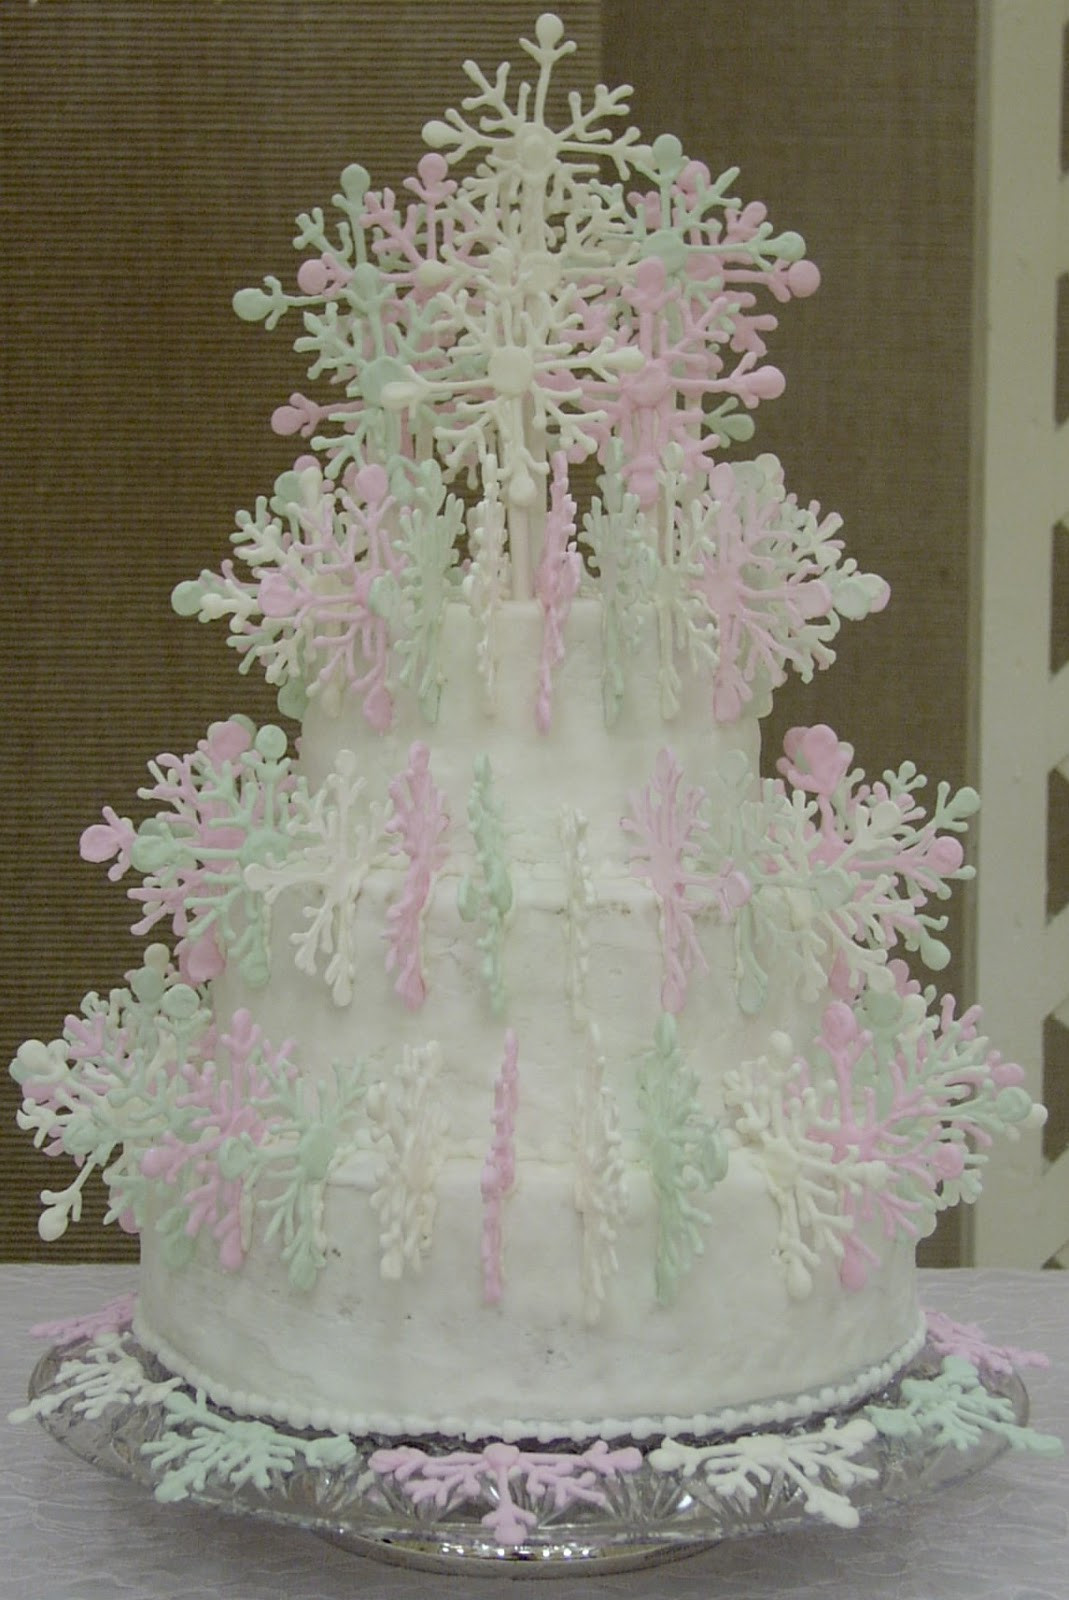 Snowflake Wedding Cakes
 Sweet Sue s and Honey B s Cakes and other Delights